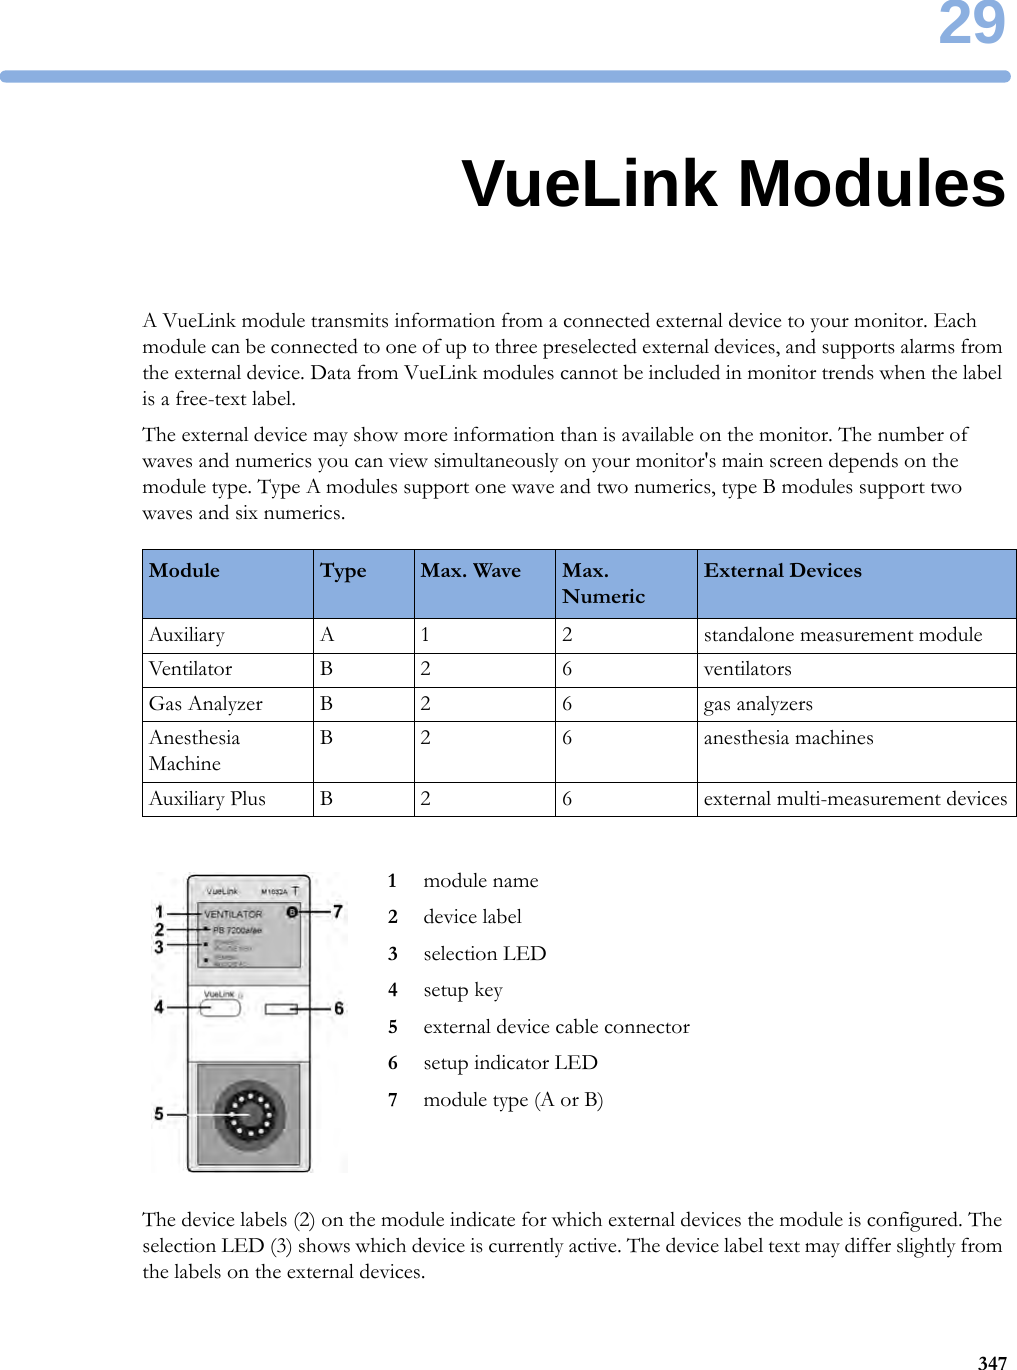 2934729VueLink ModulesA VueLink module transmits information from a connected external device to your monitor. Each module can be connected to one of up to three preselected external devices, and supports alarms from the external device. Data from VueLink modules cannot be included in monitor trends when the label is a free-text label.The external device may show more information than is available on the monitor. The number of waves and numerics you can view simultaneously on your monitor&apos;s main screen depends on the module type. Type A modules support one wave and two numerics, type B modules support two waves and six numerics.The device labels (2) on the module indicate for which external devices the module is configured. The selection LED (3) shows which device is currently active. The device label text may differ slightly from the labels on the external devices.Module Type Max. Wave Max. NumericExternal DevicesAuxiliary A 1 2 standalone measurement moduleVentilator B 2 6 ventilatorsGas Analyzer B 2 6 gas analyzersAnesthesia MachineB 2 6 anesthesia machinesAuxiliary Plus B 2 6 external multi-measurement devices1module name2device label3selection LED4setup key5external device cable connector6setup indicator LED7module type (A or B)